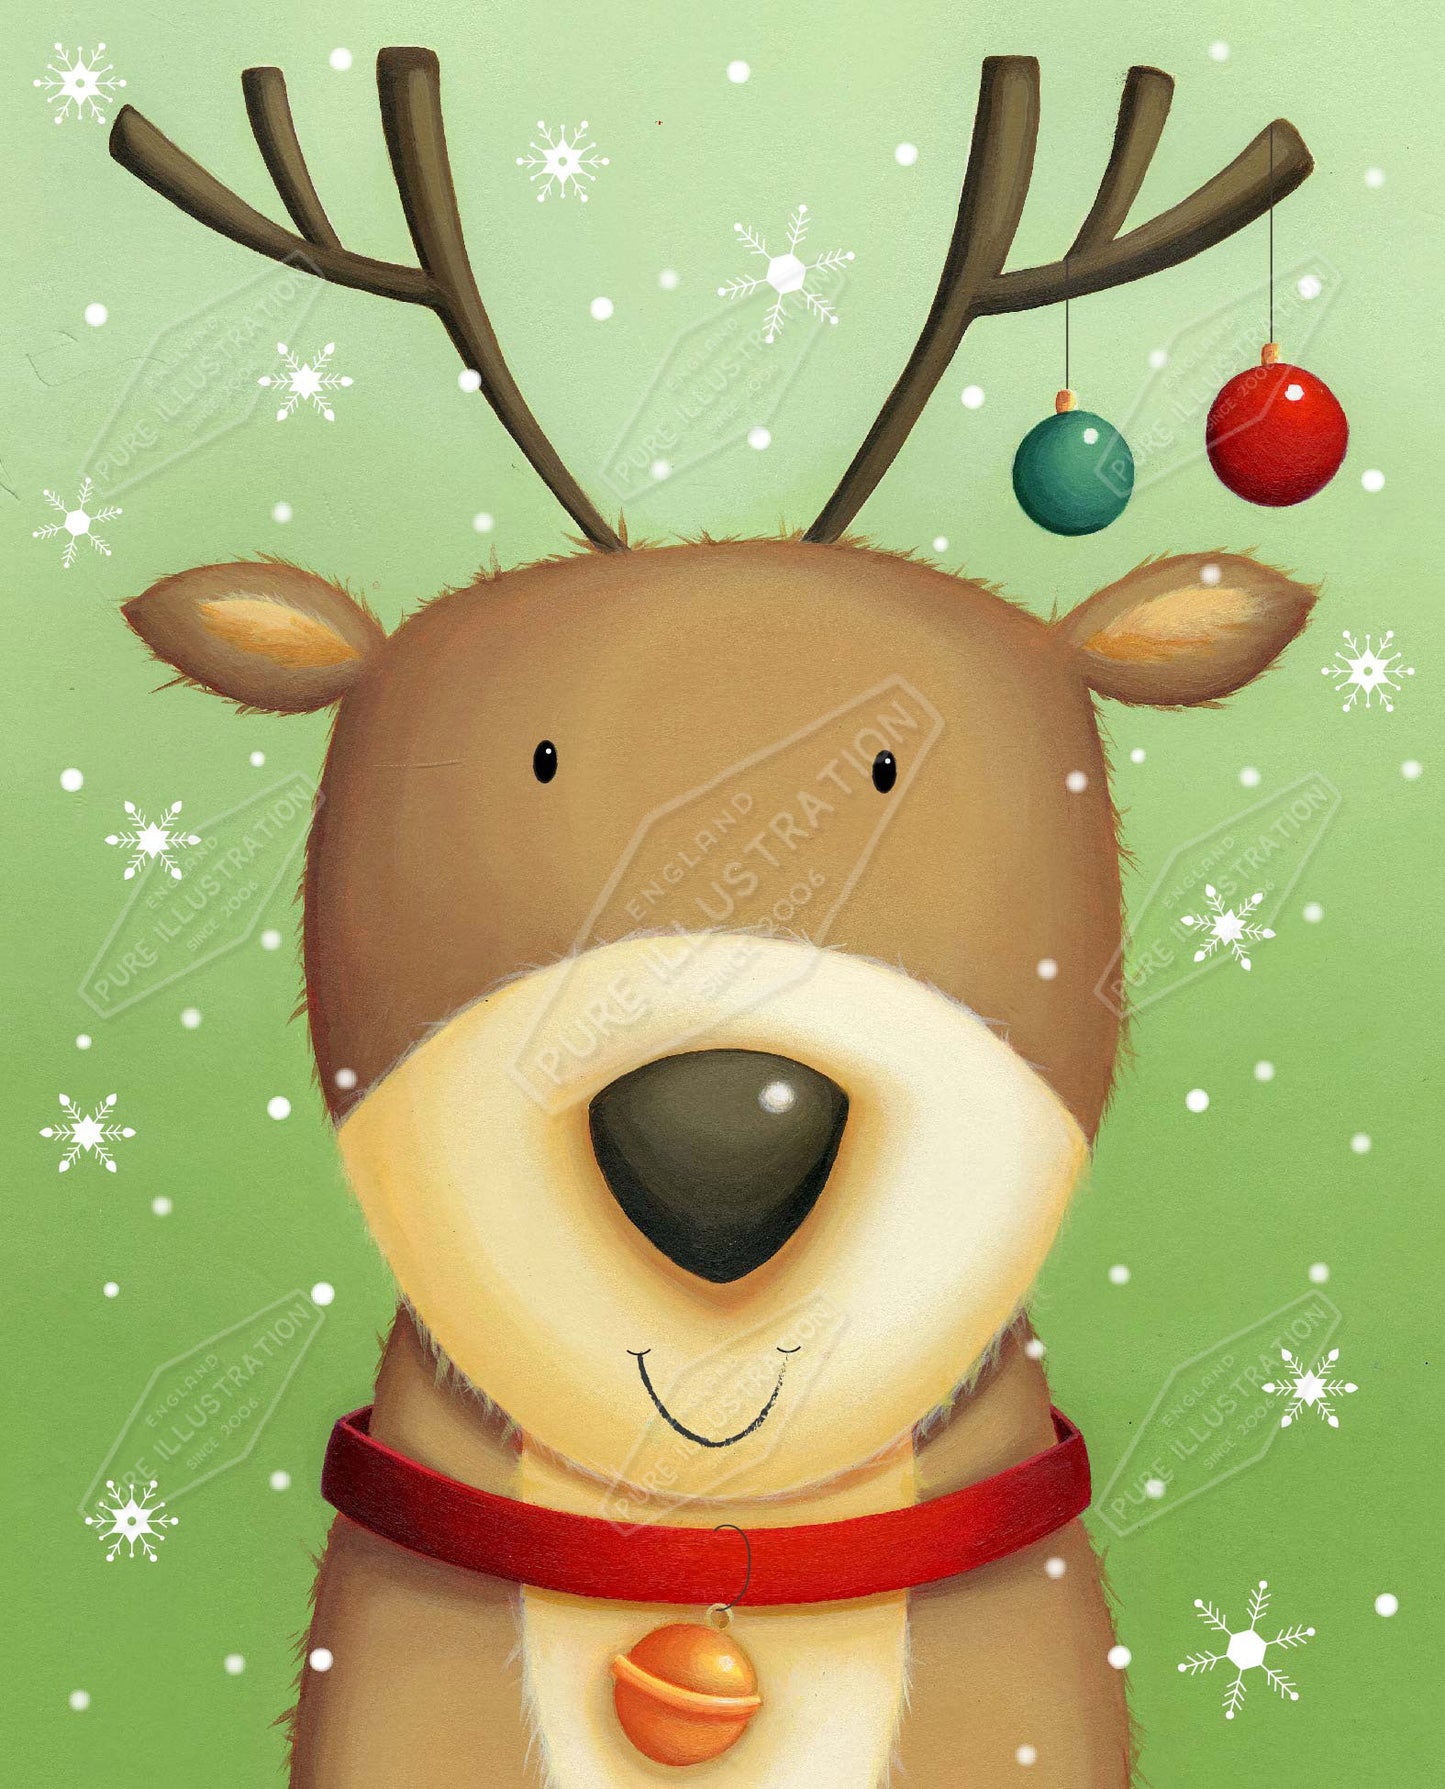 00035103SPI- Sarah Pitt is represented by Pure Art Licensing Agency - Christmas Greeting Card Design